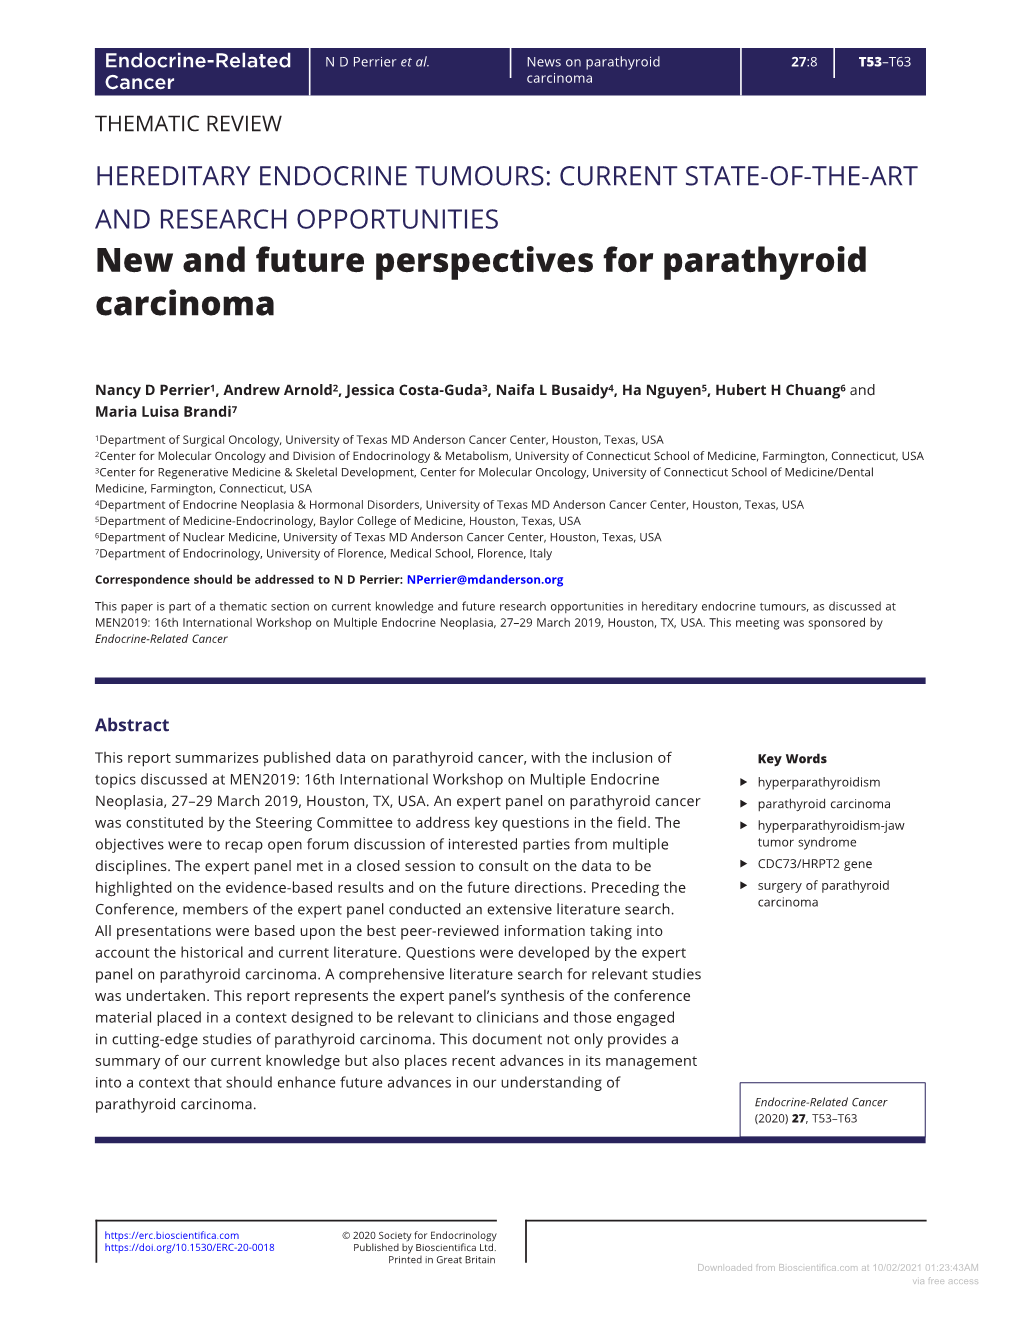 New and Future Perspectives for Parathyroid Carcinoma